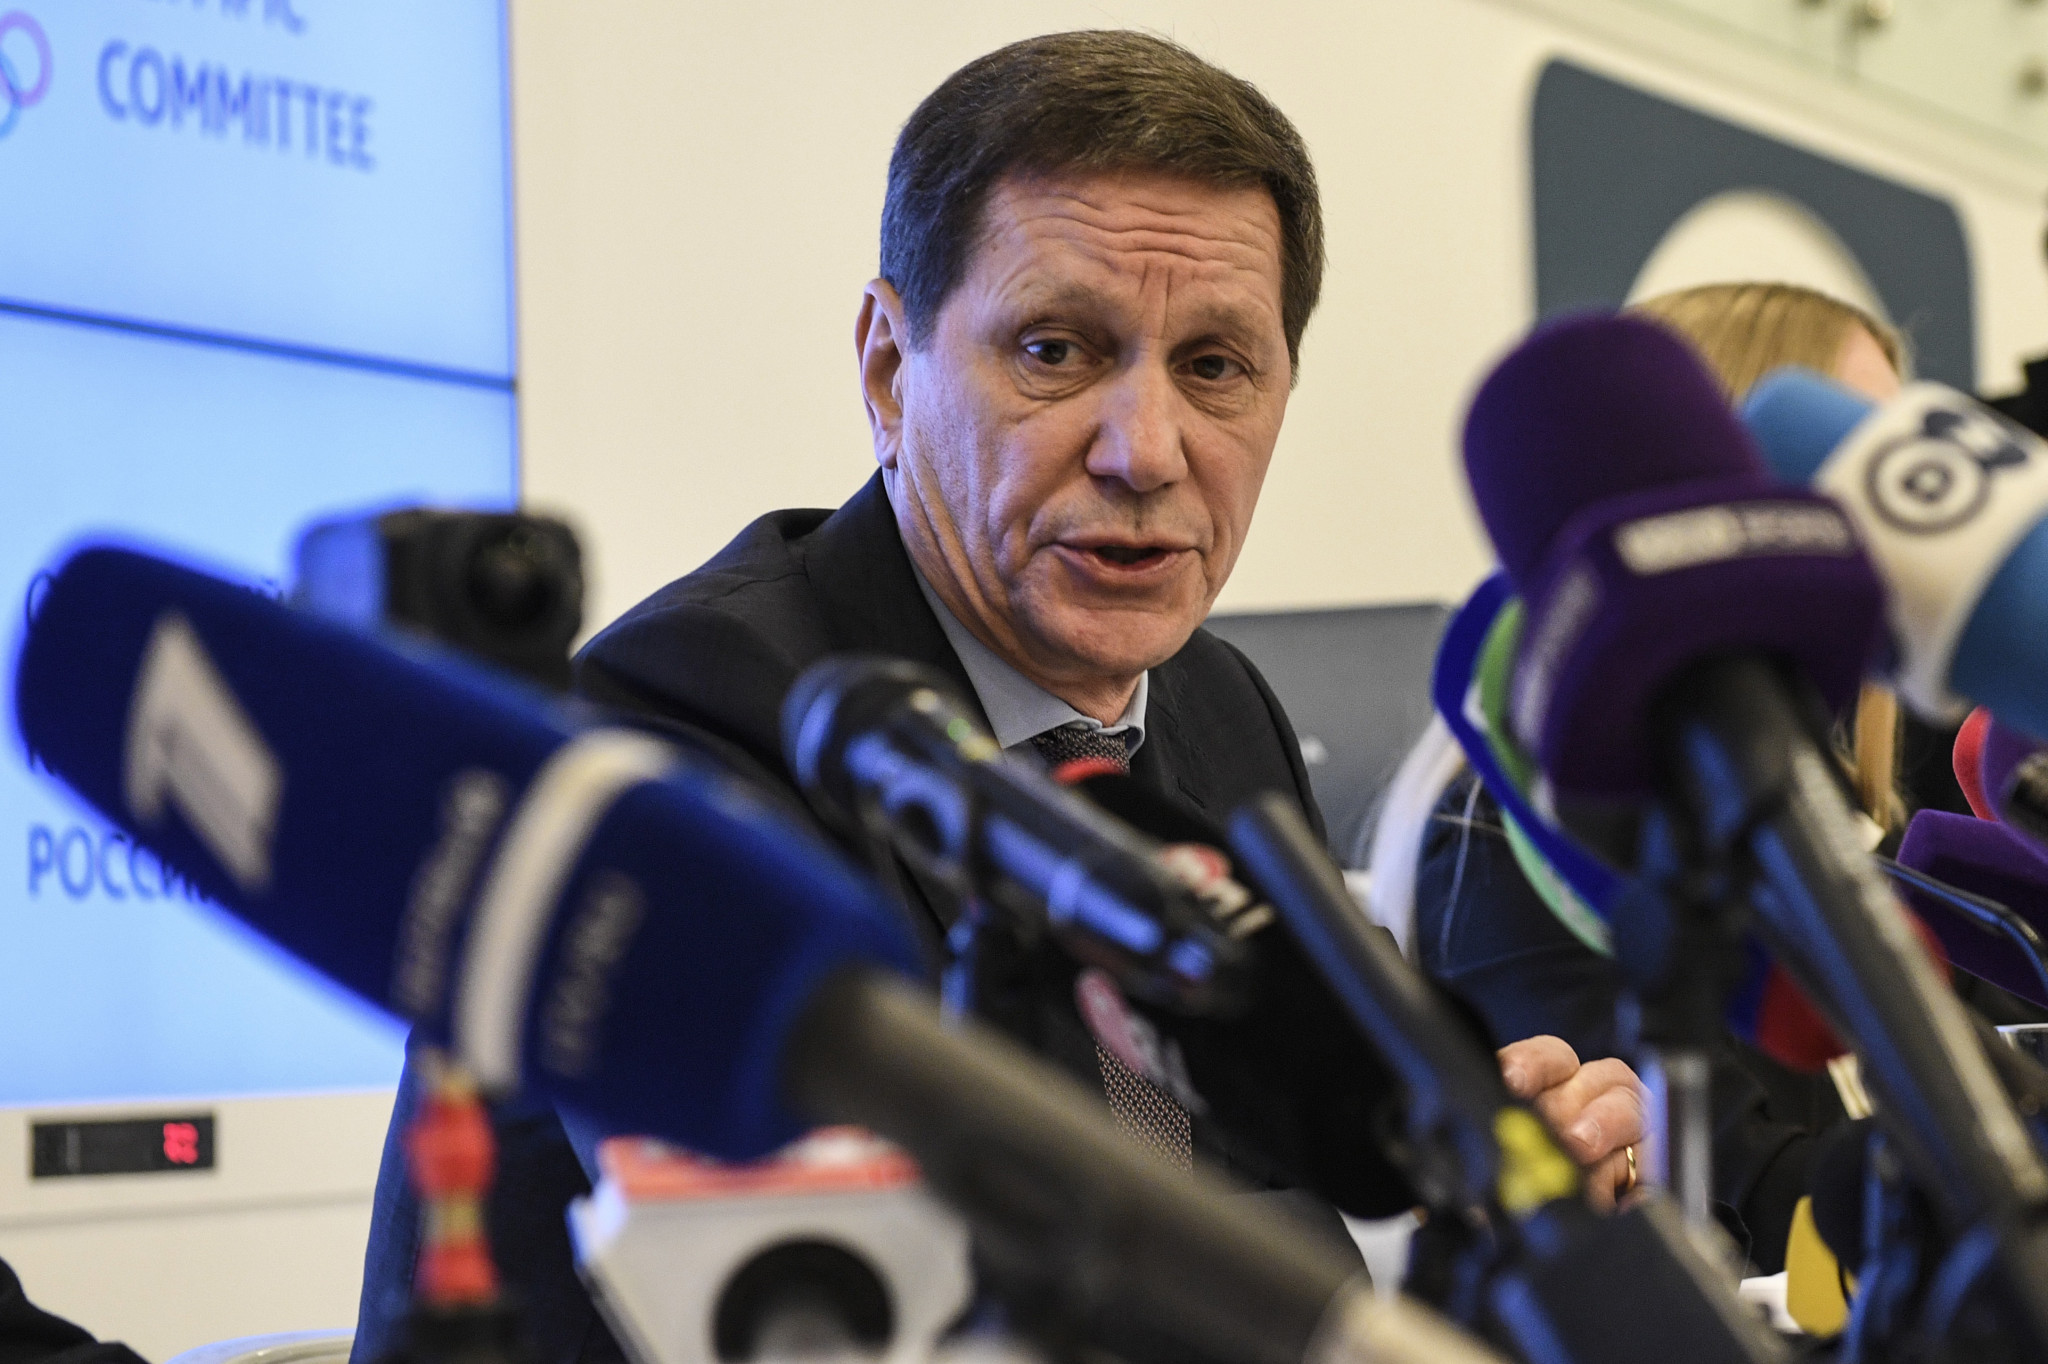 The iNADO have warned the Russian Olympic Committee under its President Alexander Zhukov should not be reinstated as quickly as the IOC hope, which could be as early as the Closing Ceremony of Pyeongchang 2018 ©Getty Images